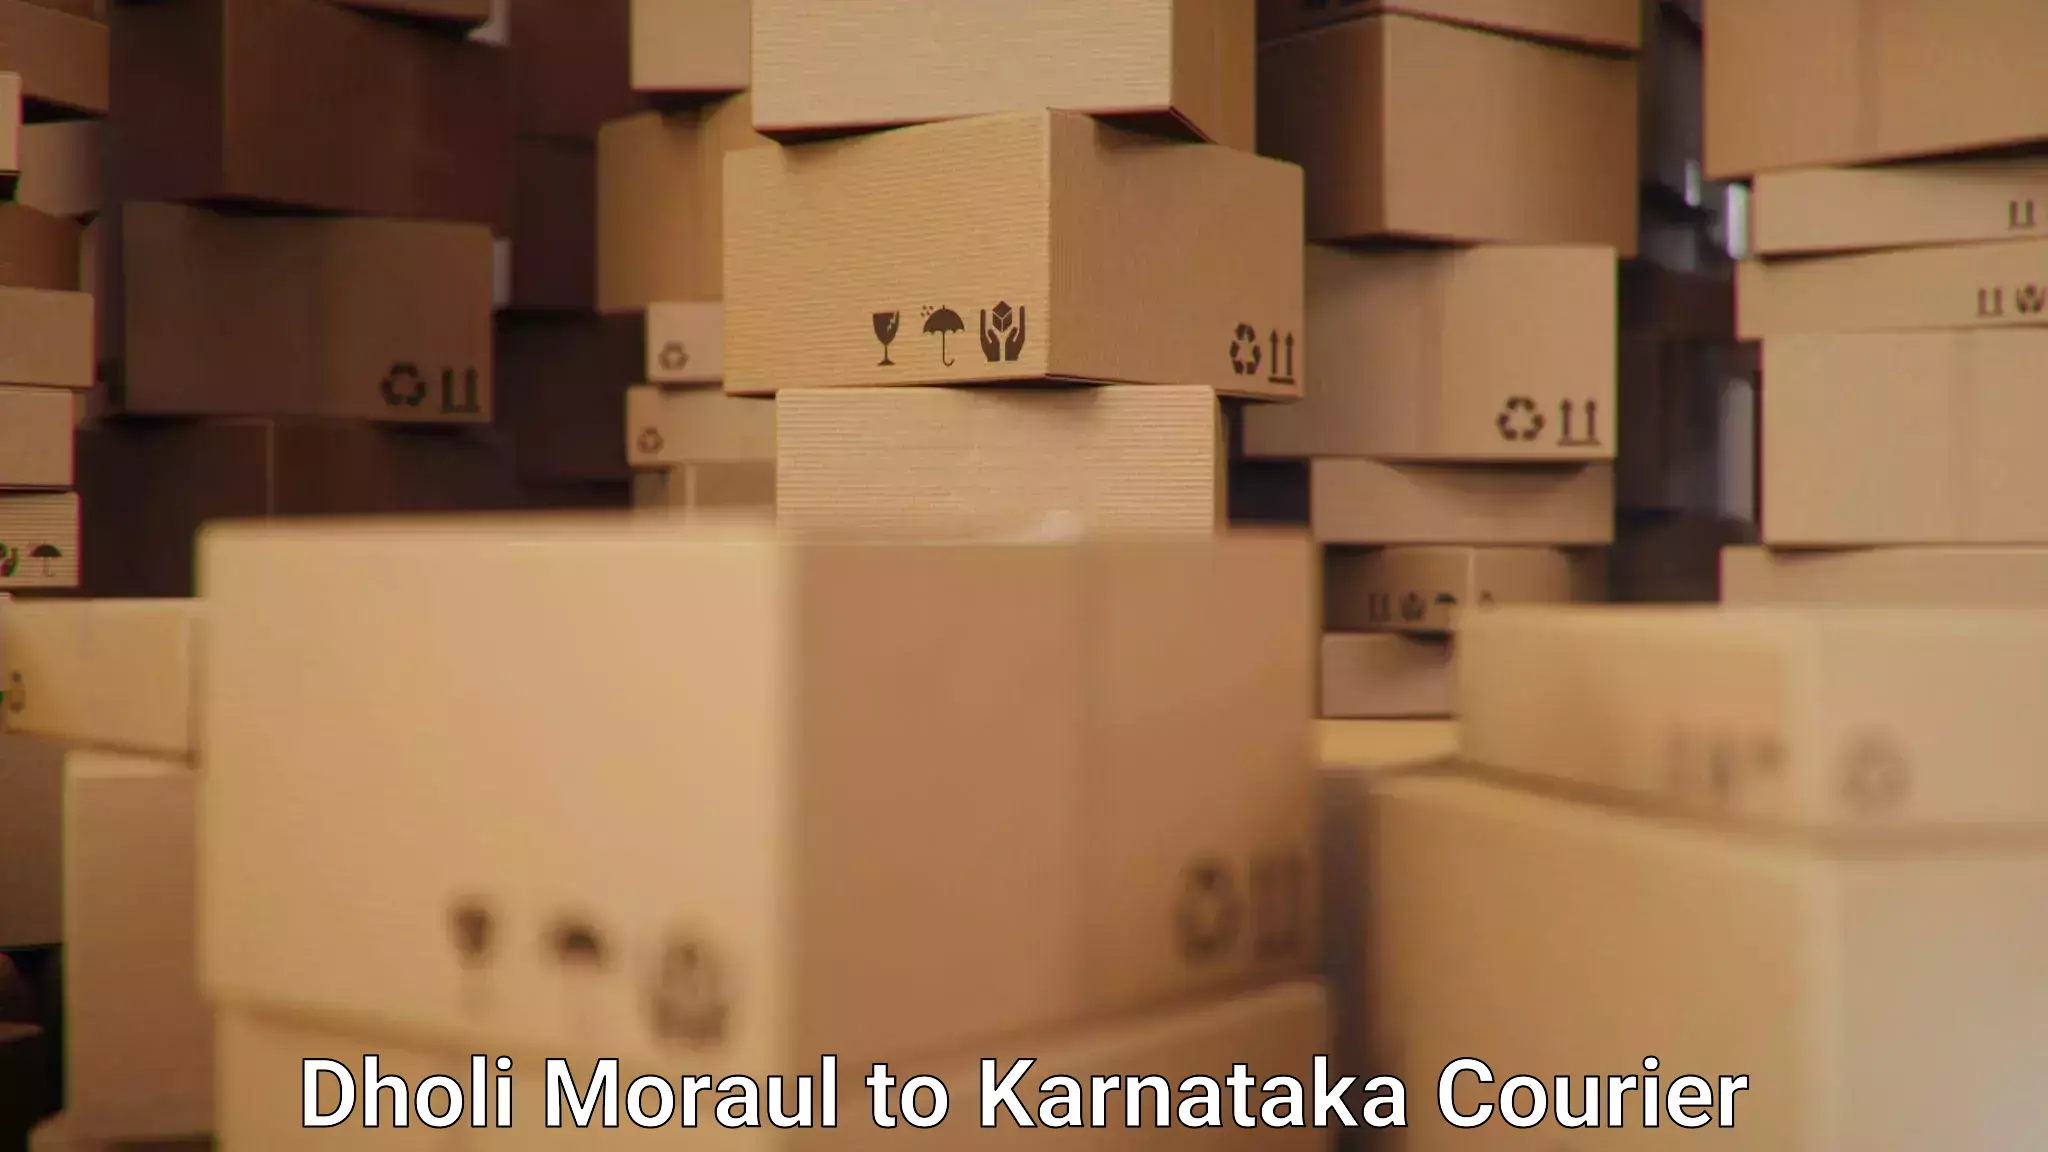 International courier rates Dholi Moraul to Bantwal